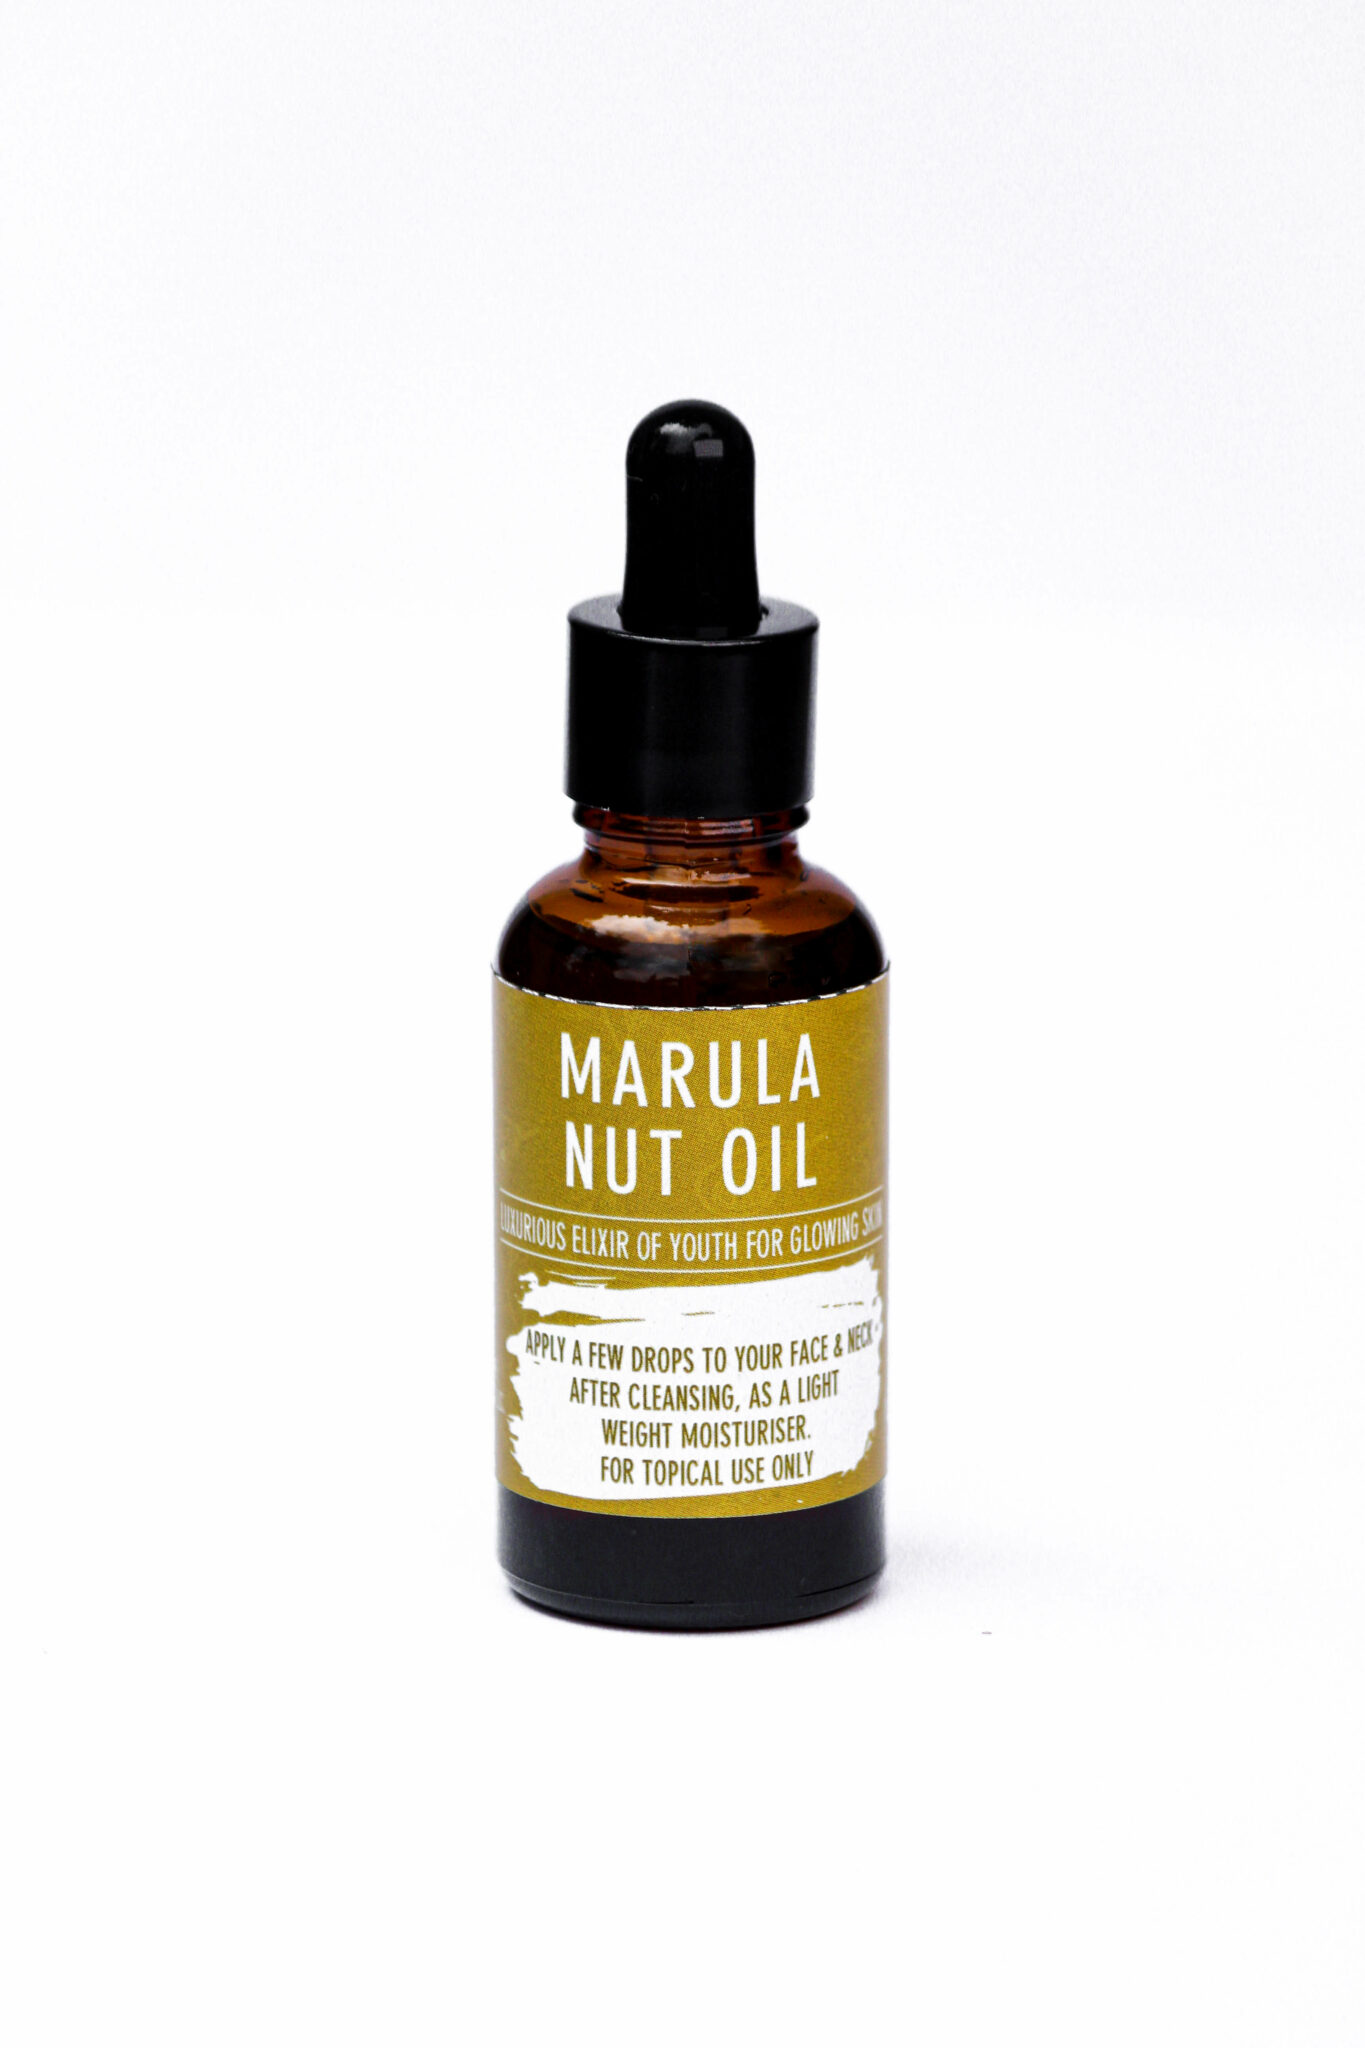 A bottle of cold pressed marula oil